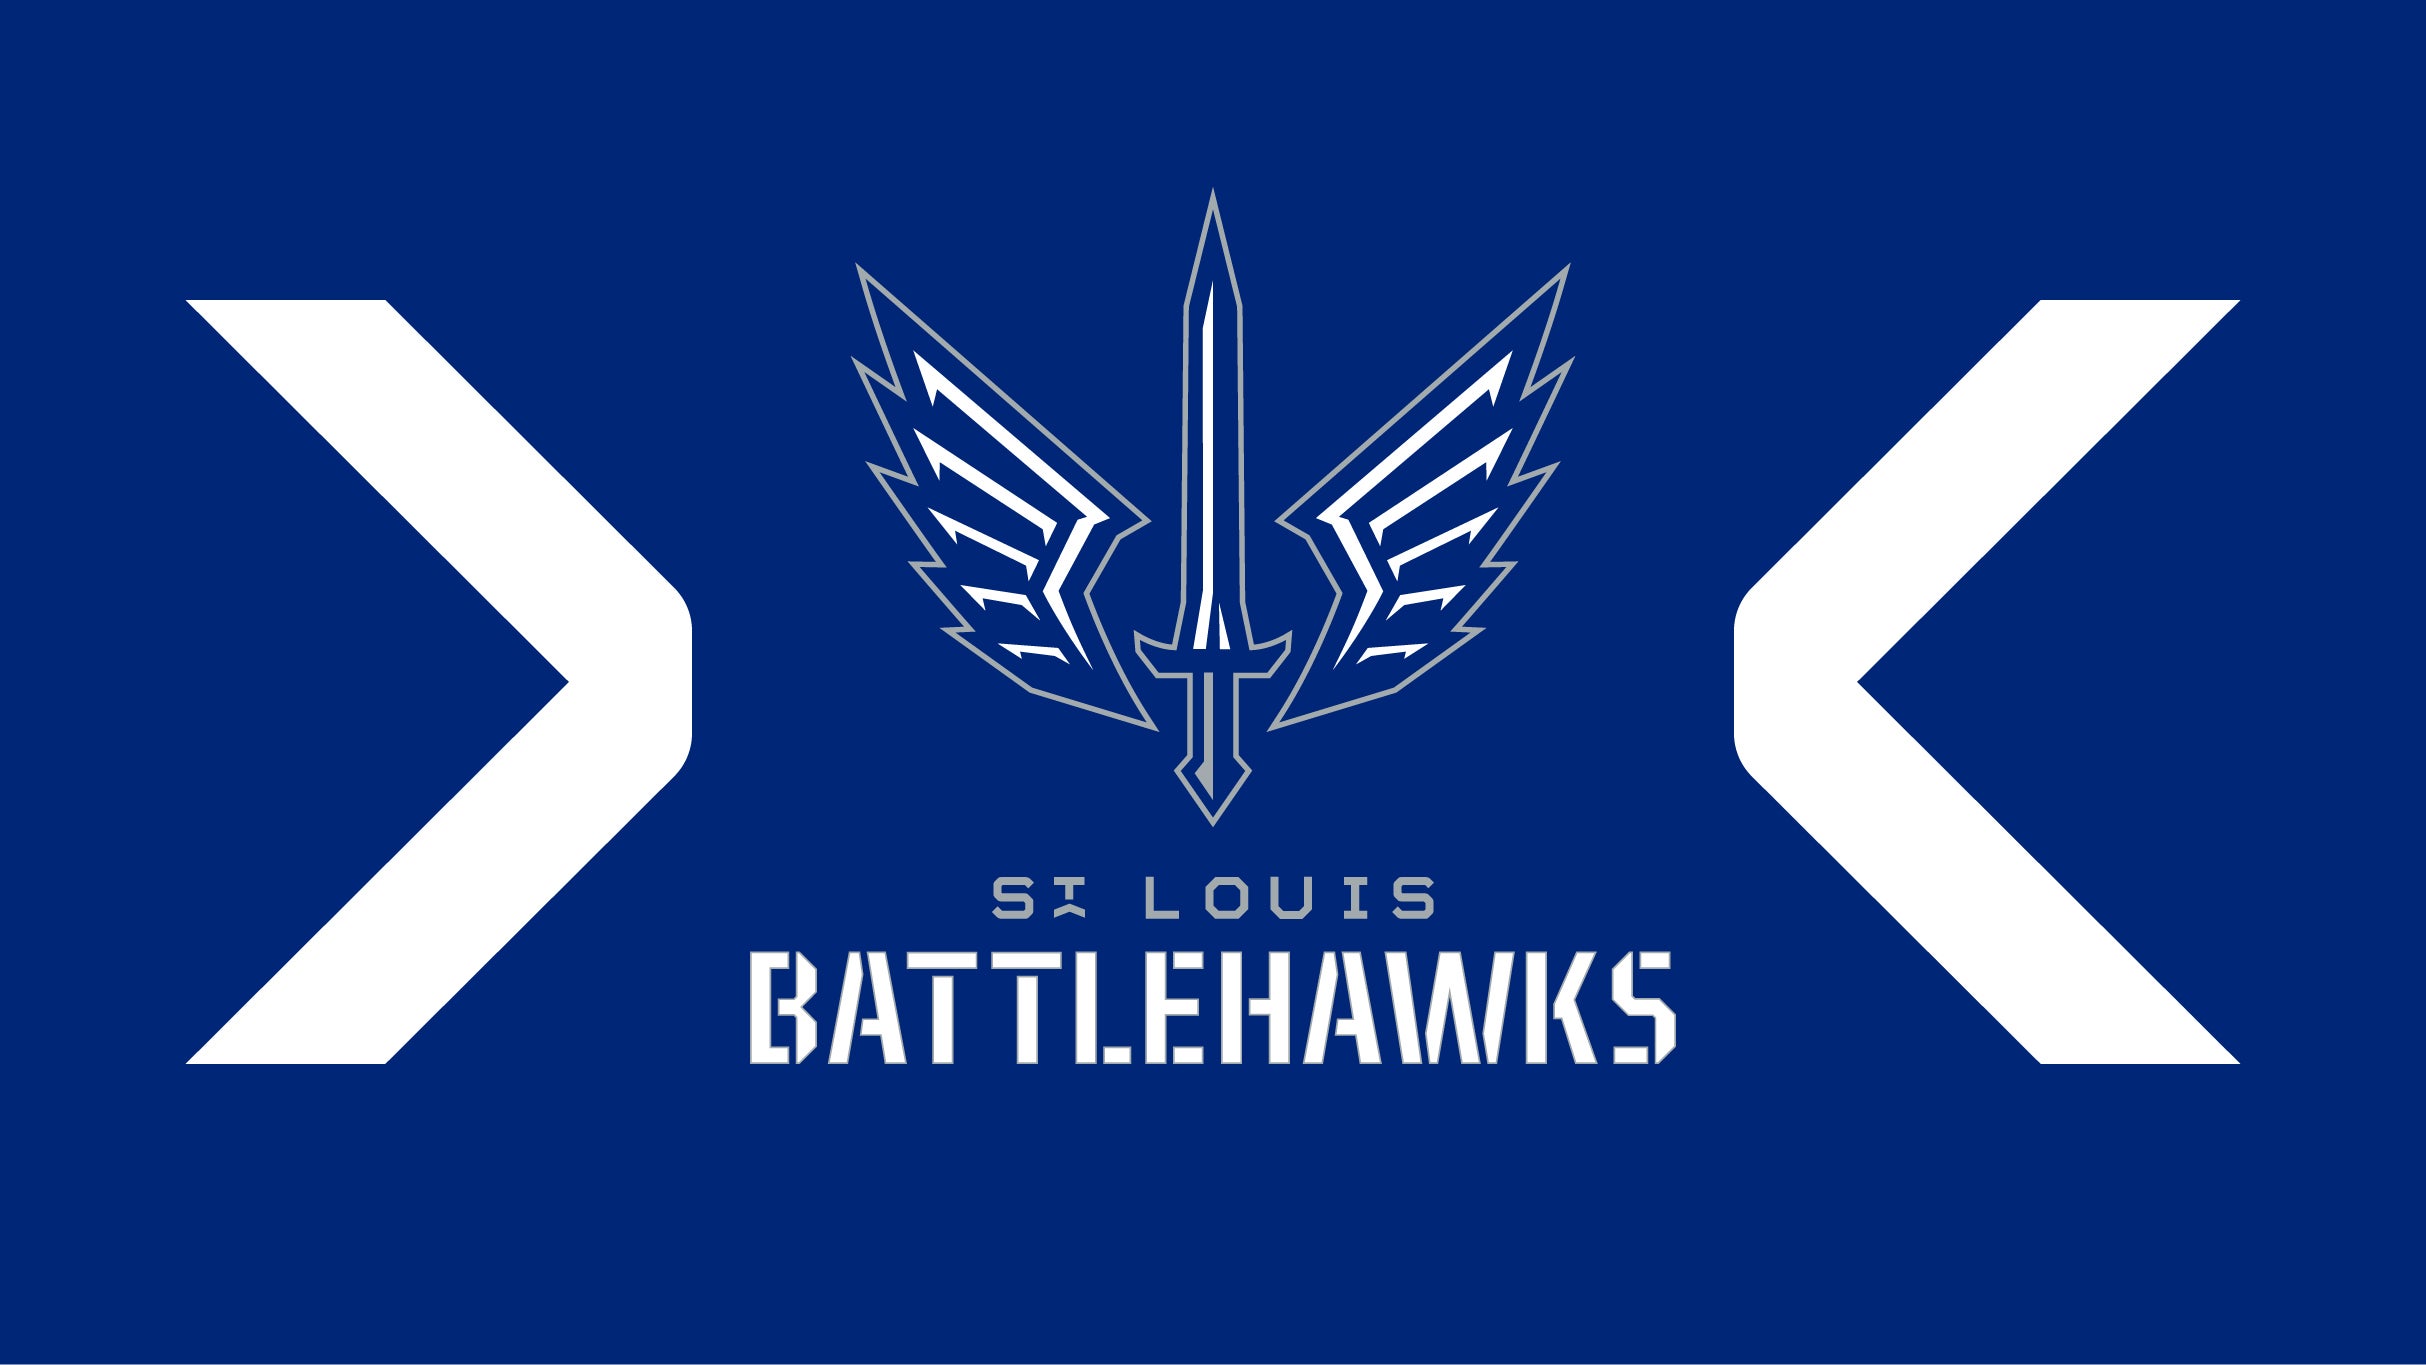 The XFL's St. Louis Battlehawks return to the Dome this weekend